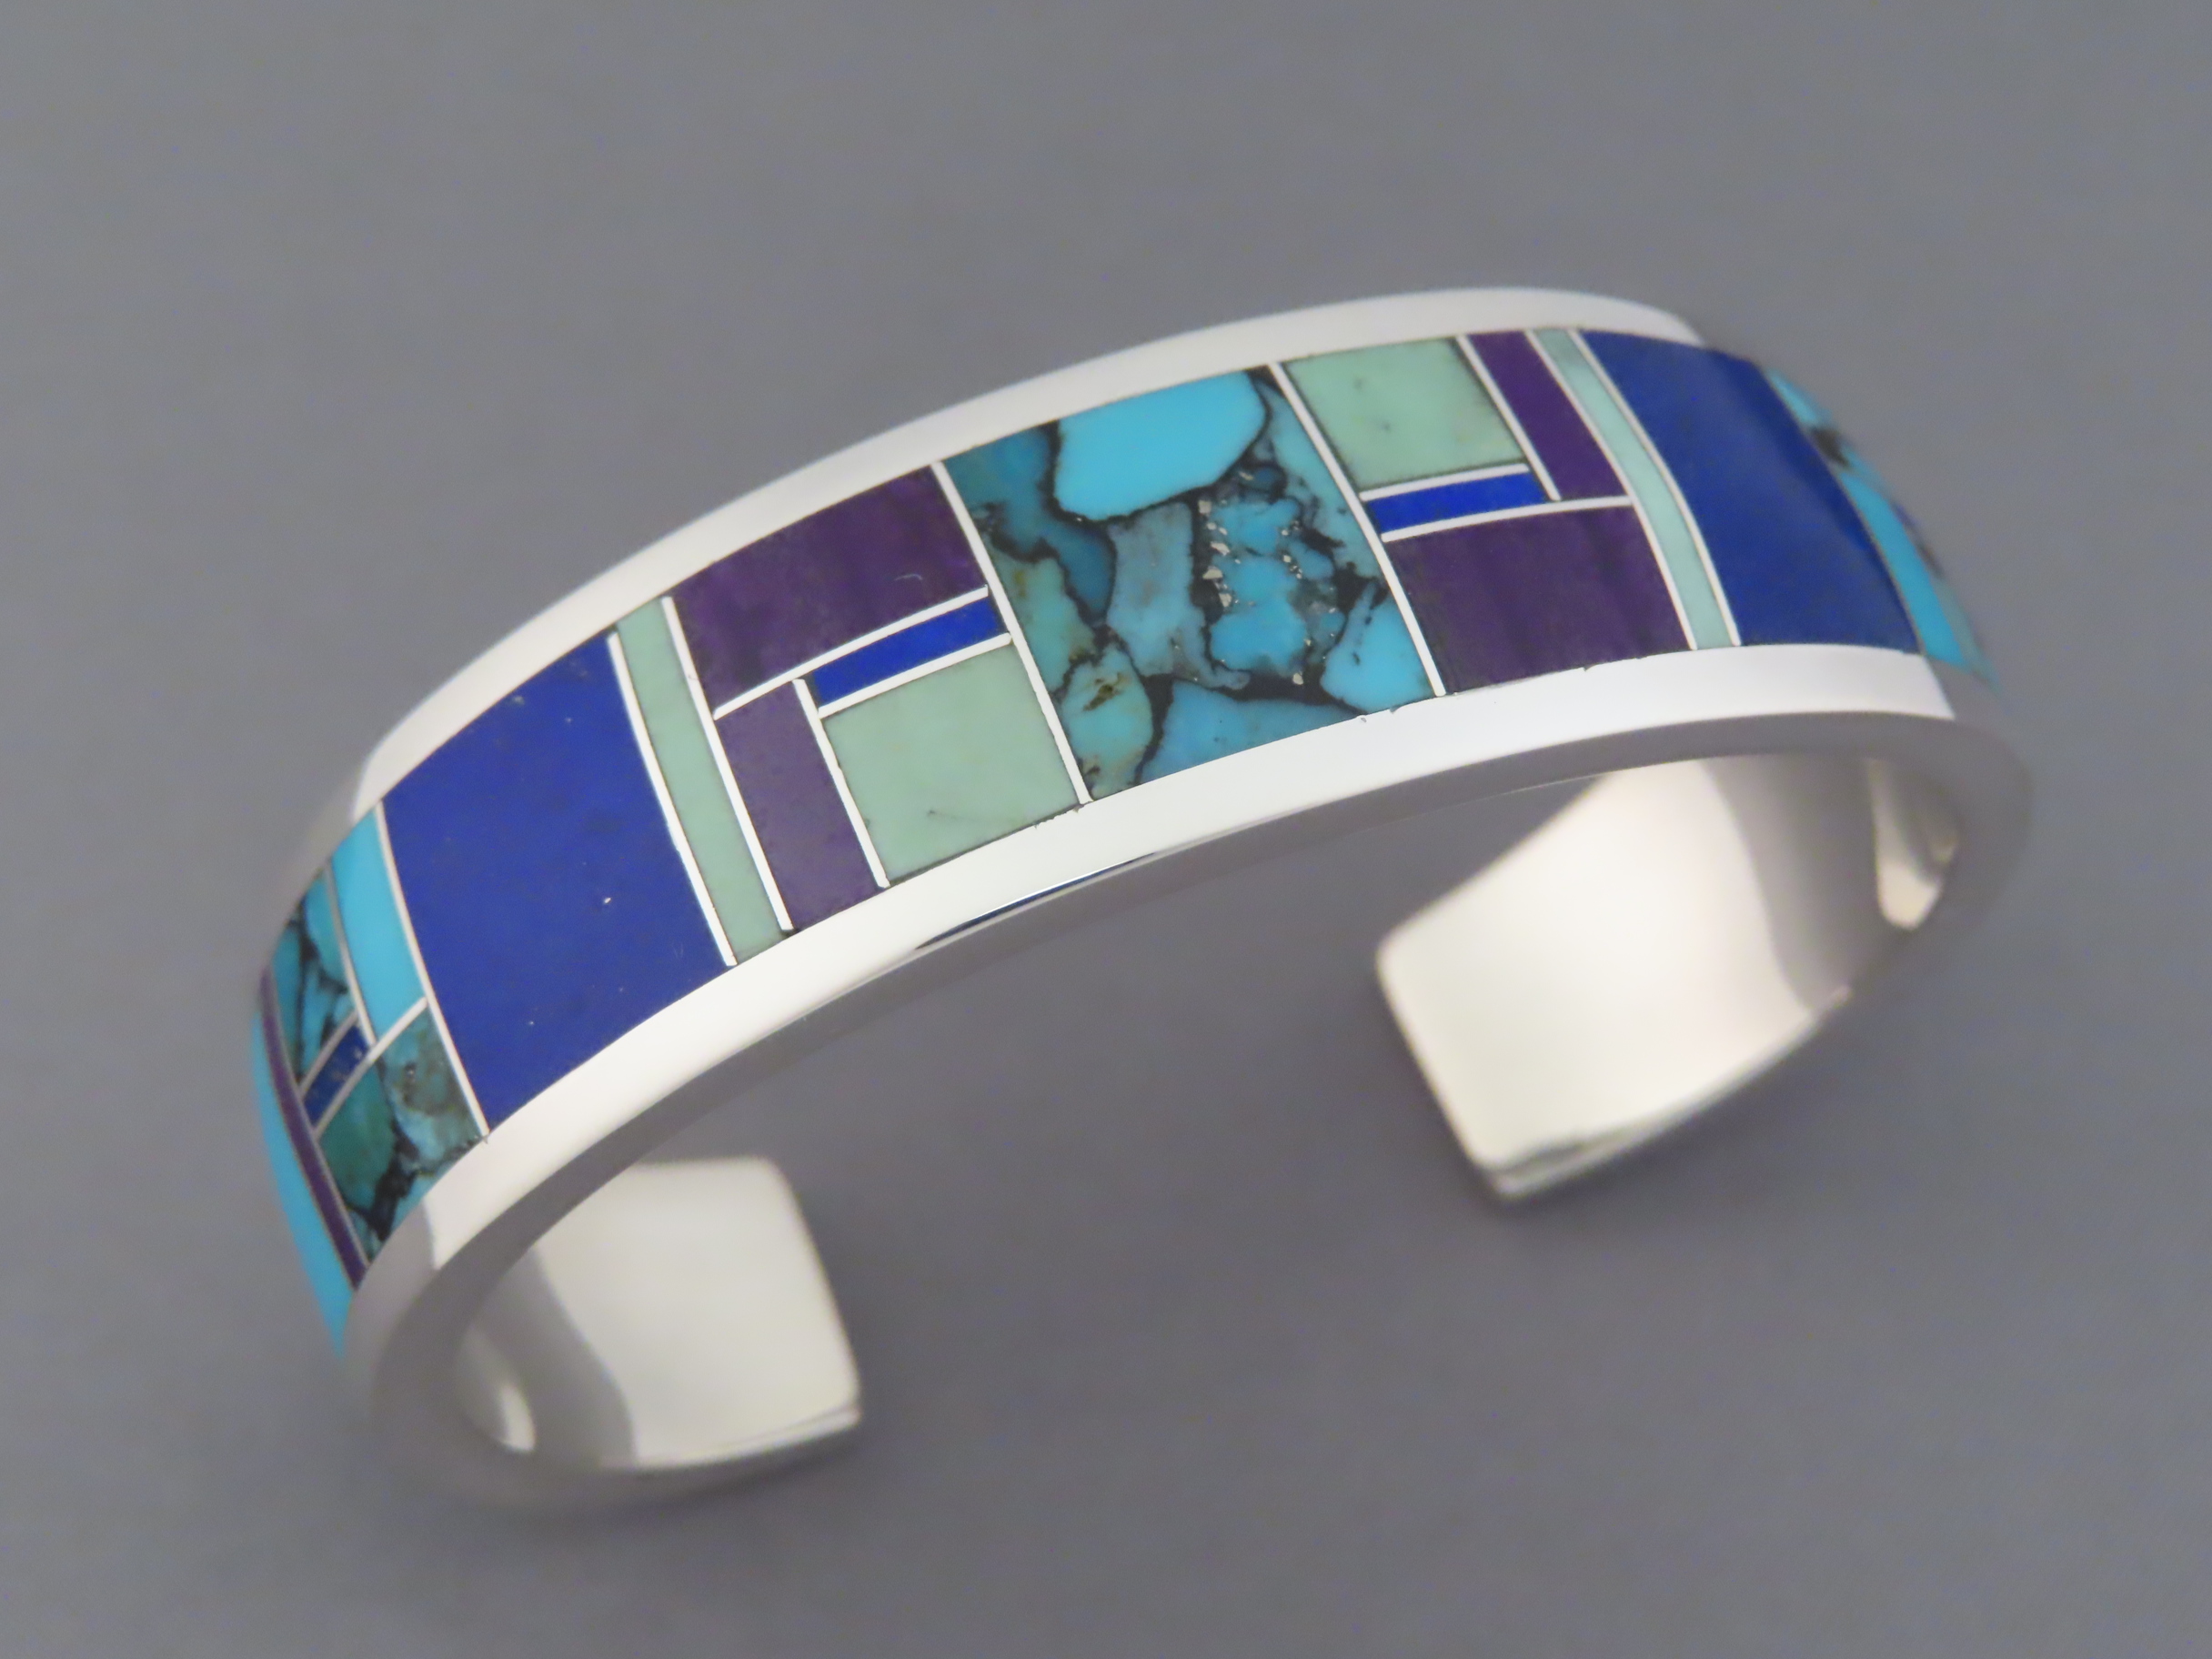 Buy Inlay Jewelry - Inlaid Multi-Stone Cuff Bracelet by Native American Indian Jeweler, Peterson Chee $660- FOR SALE